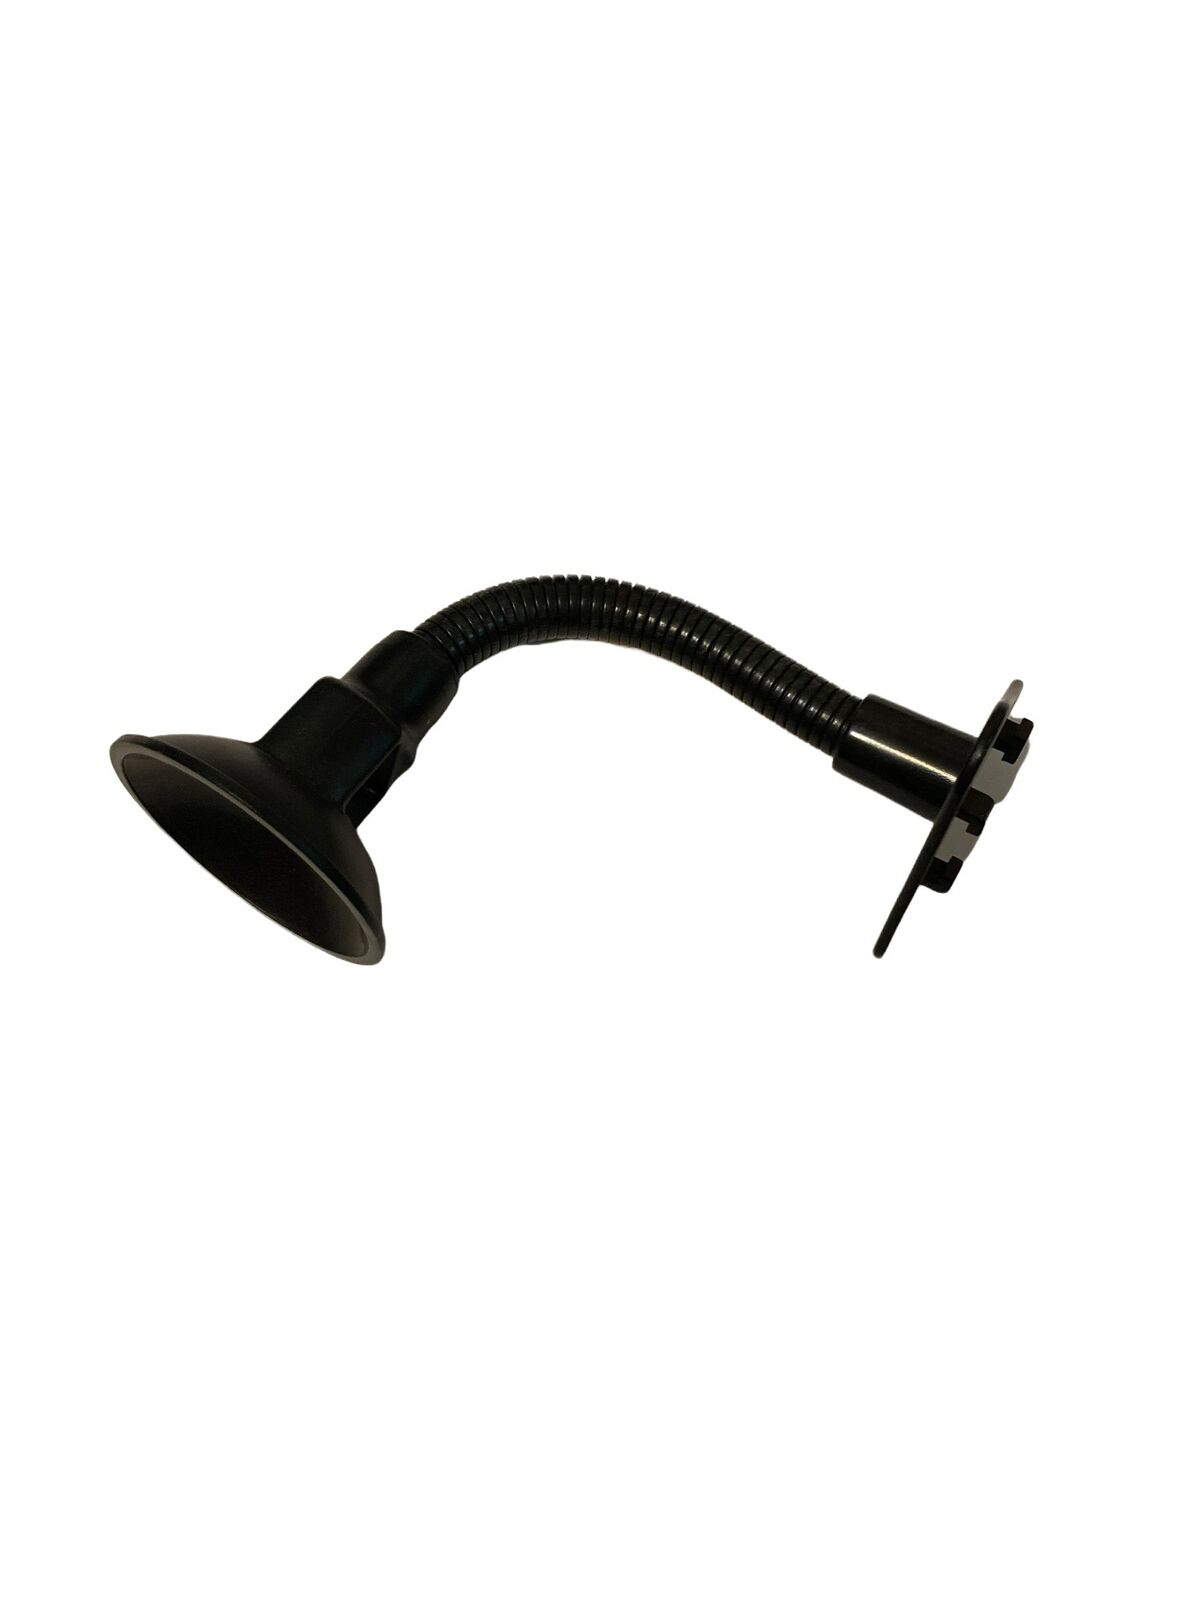 Unknown Clamp Stand? black plastic